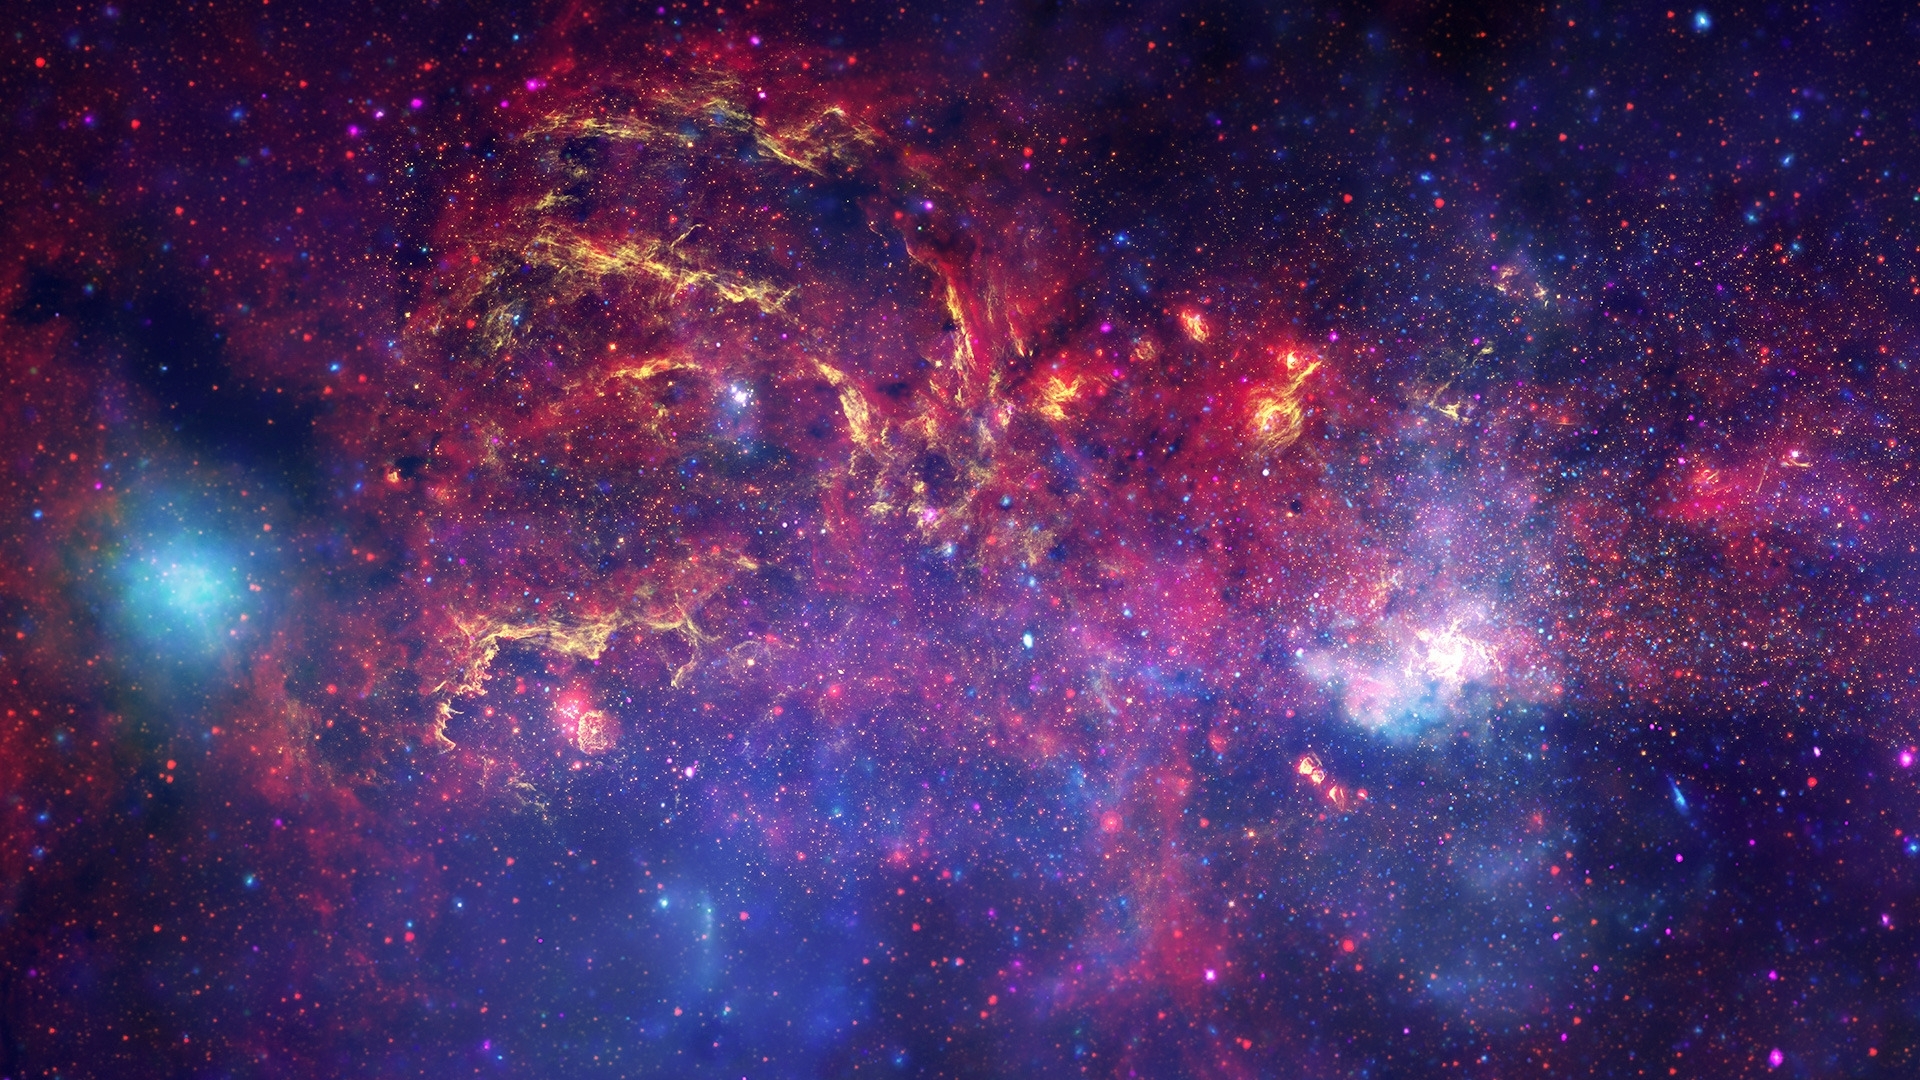 Sagittarius B2-Consisting of ethyl formate, this is the same gas that gives raspberries their taste and rum its smell.